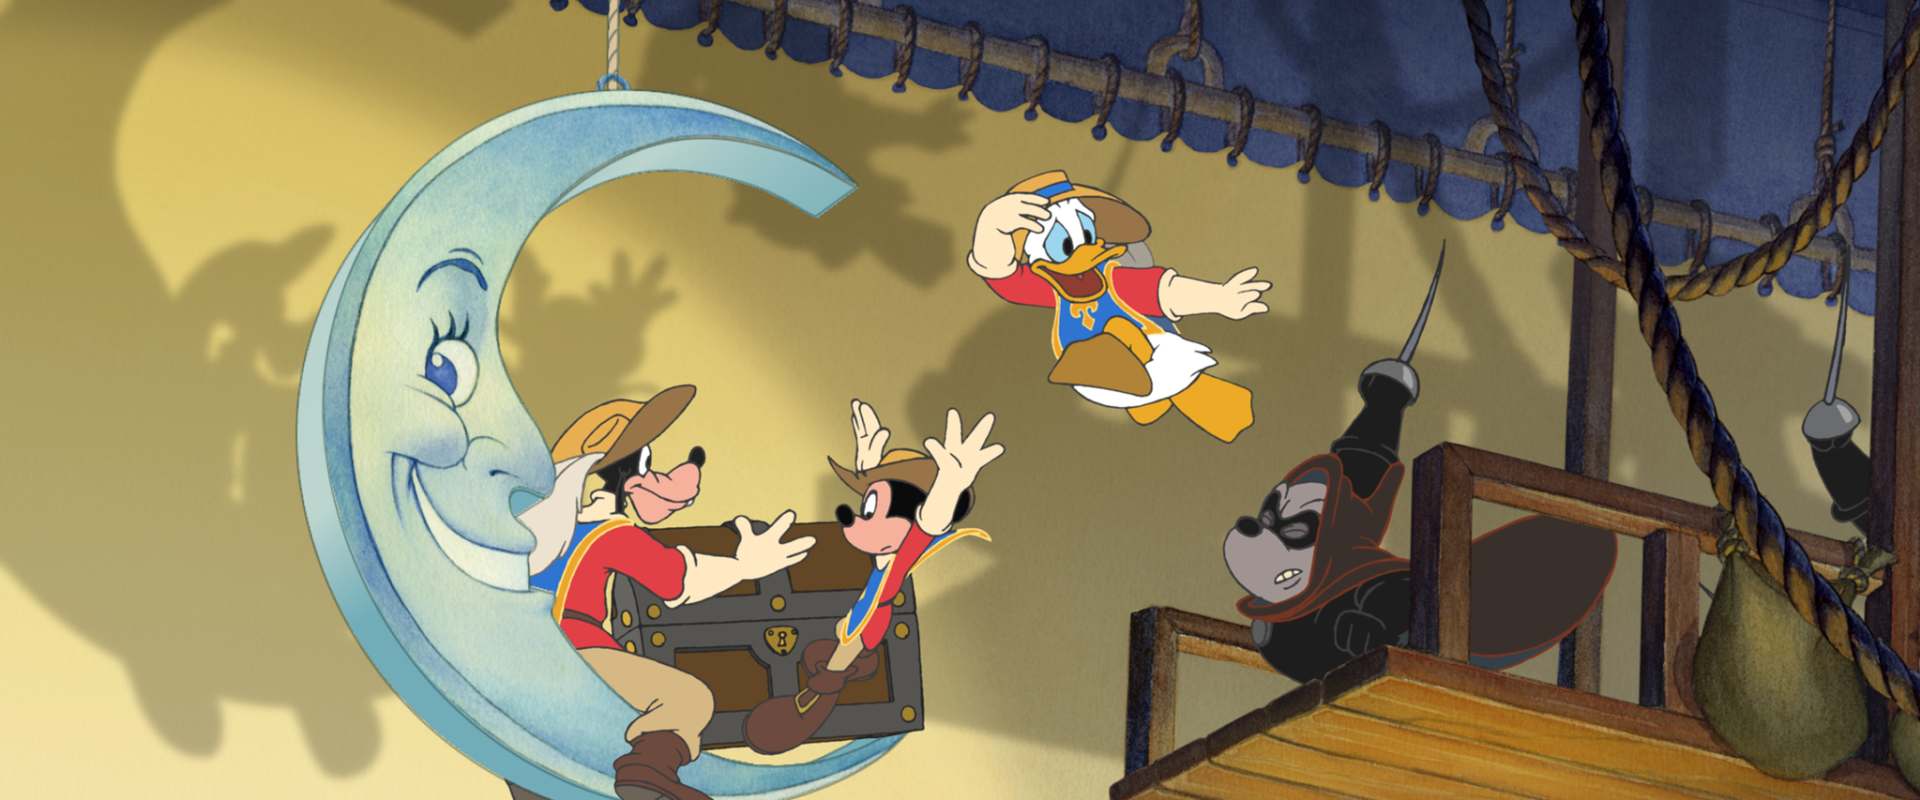 Mickey, Donald, Goofy: The Three Musketeers background 1